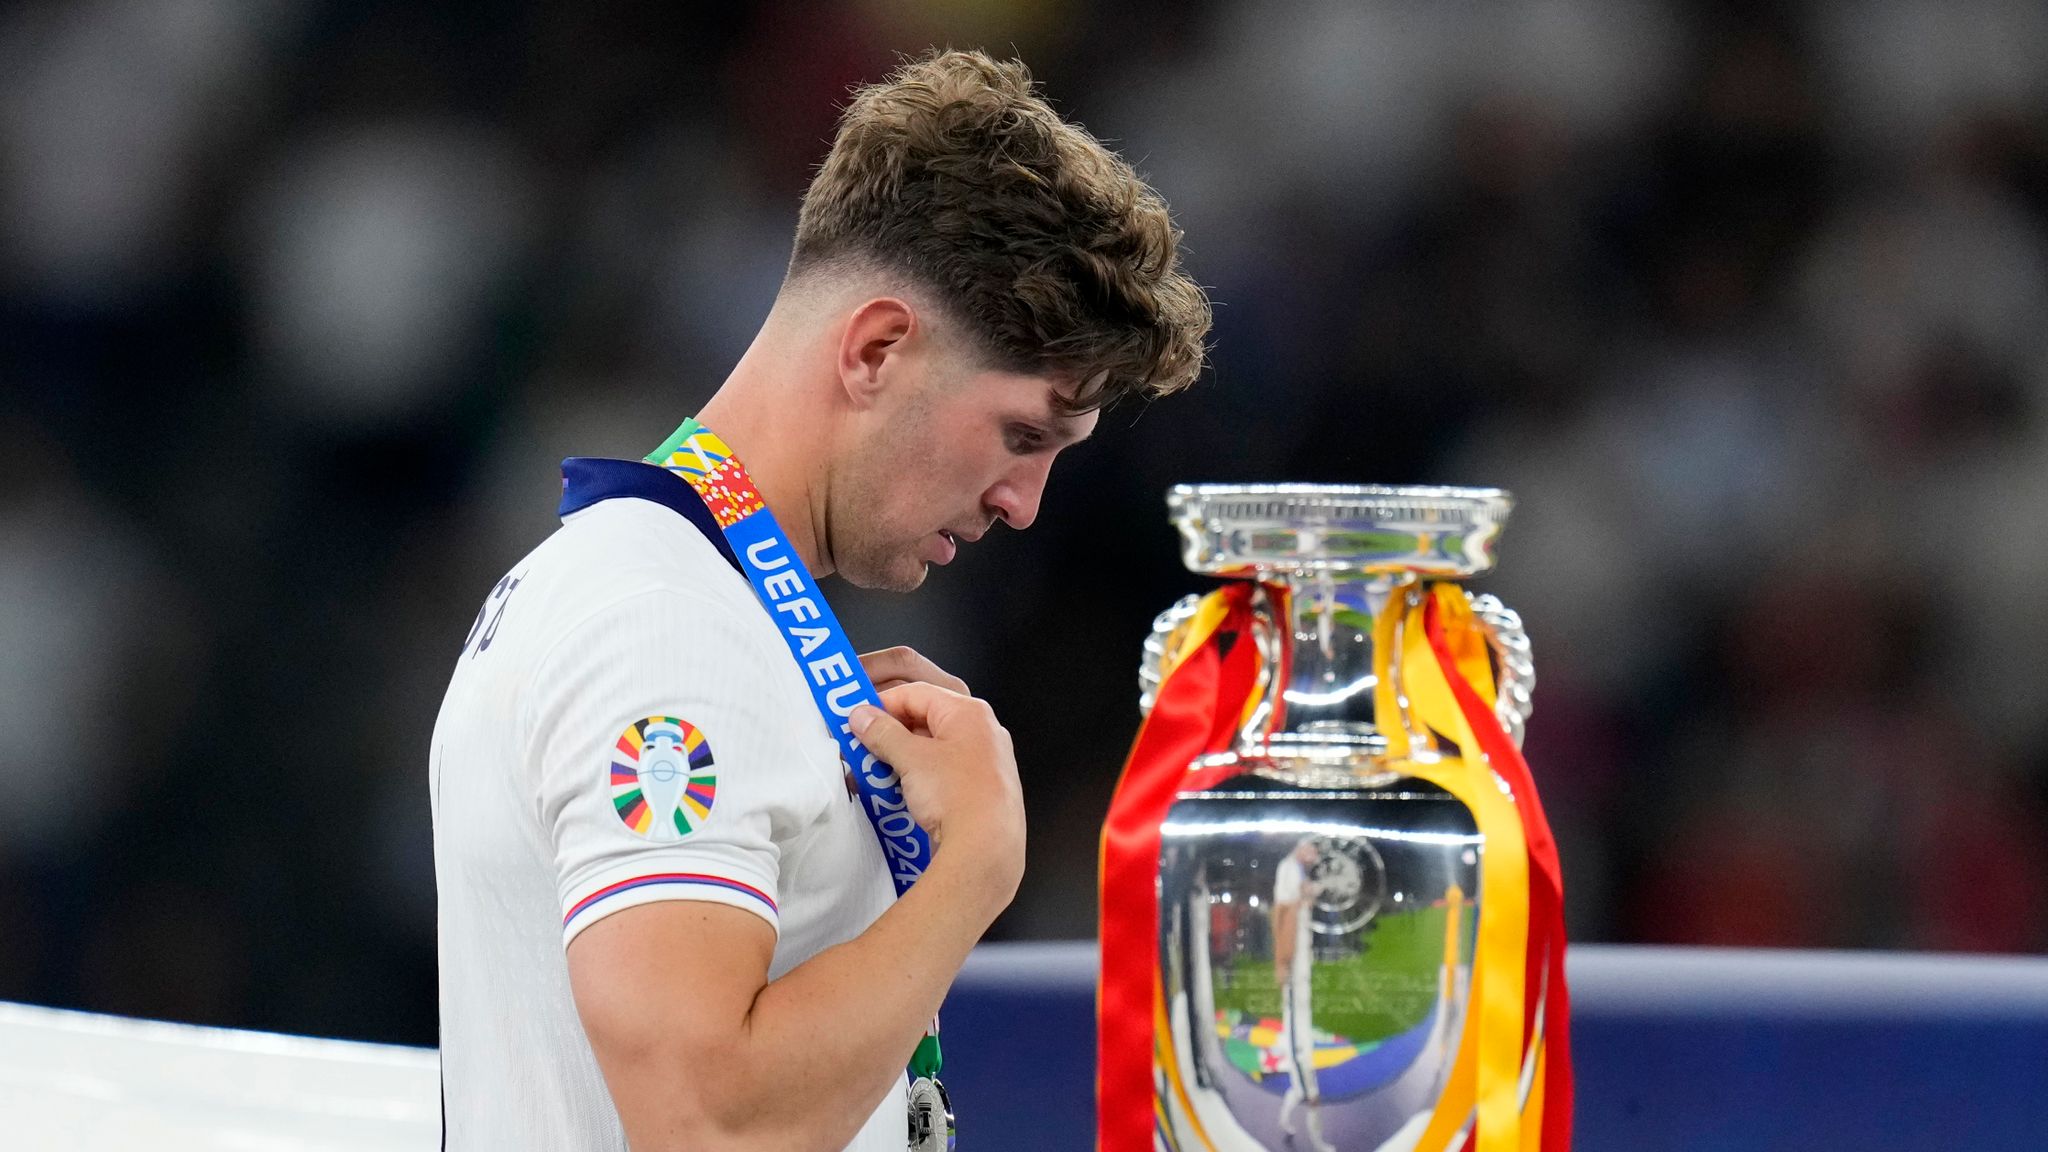 Englands John Stones walks past the trophy - WTX News Breaking News, fashion & Culture from around the World - Daily News Briefings -Finance, Business, Politics & Sports News